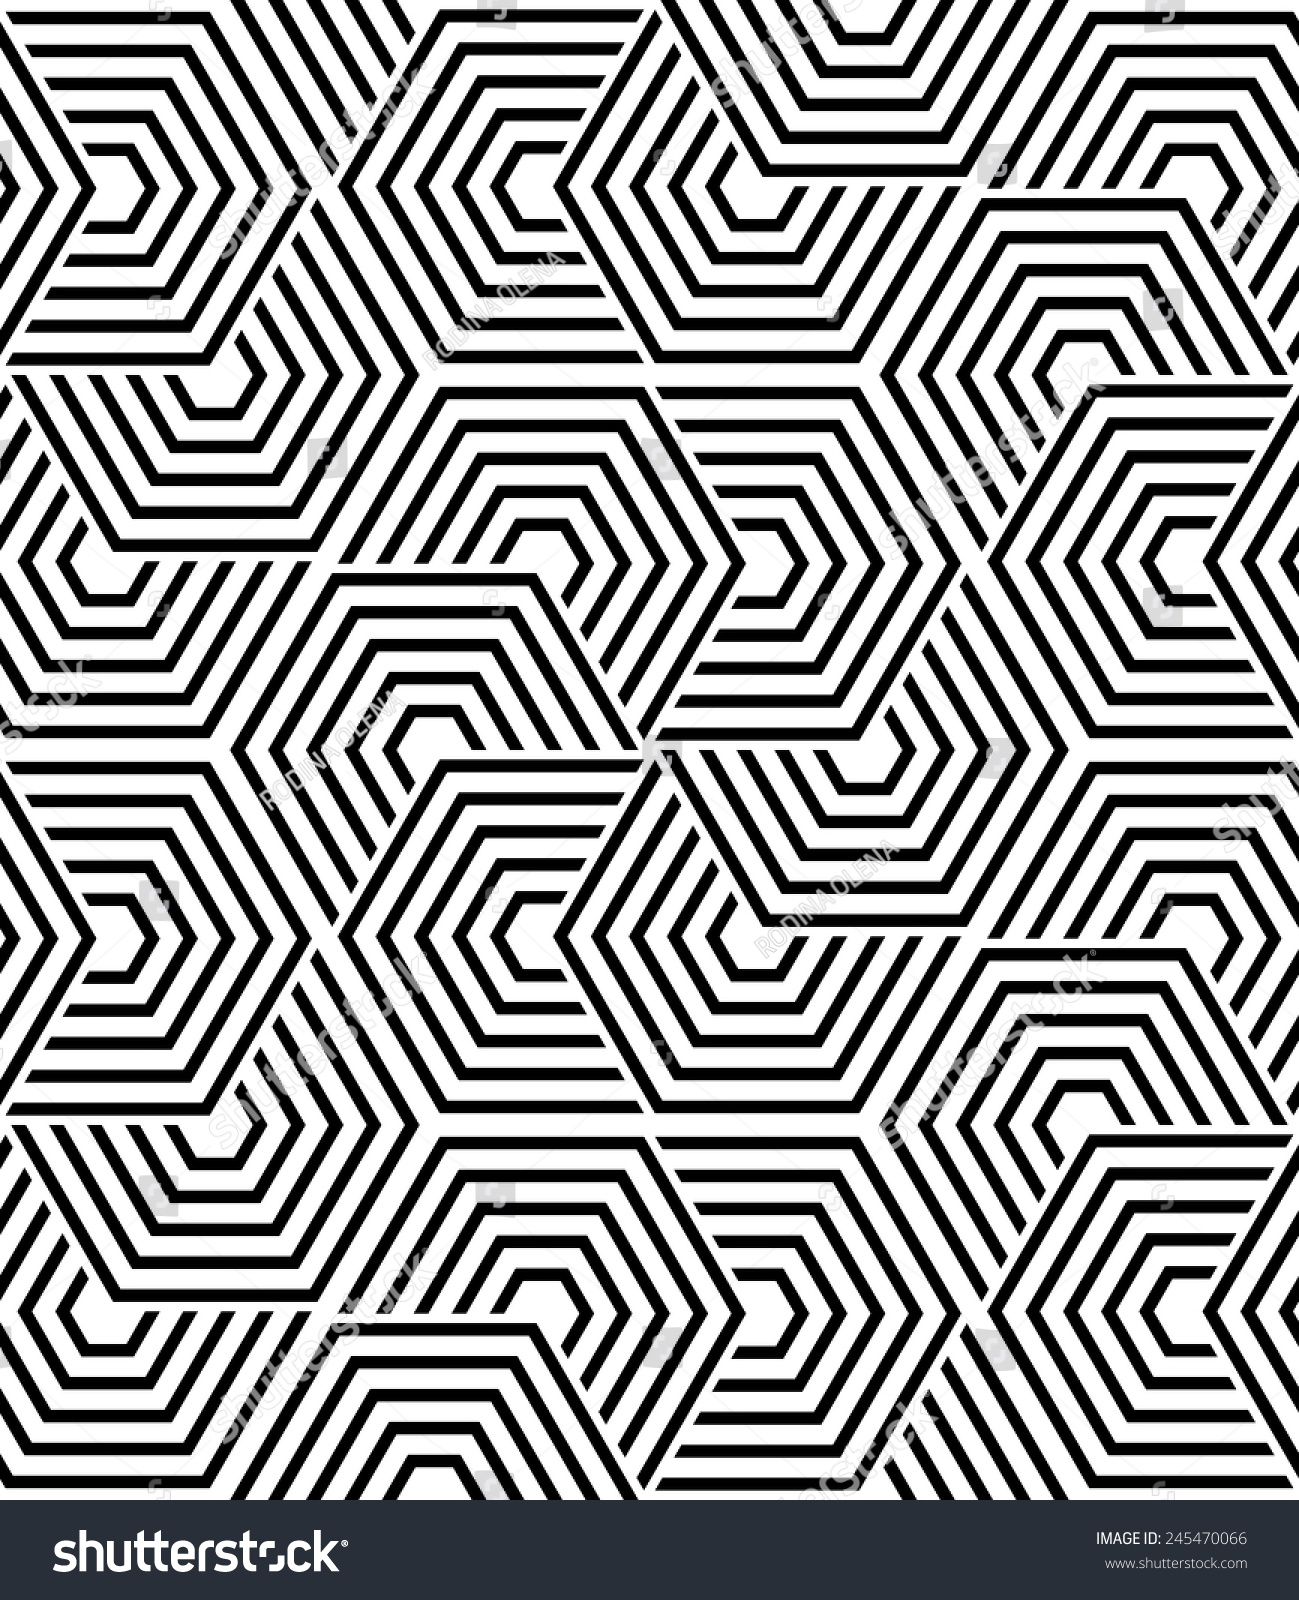 The Geometric Pattern By Lines, Stripes. Seamless Vector Background ...